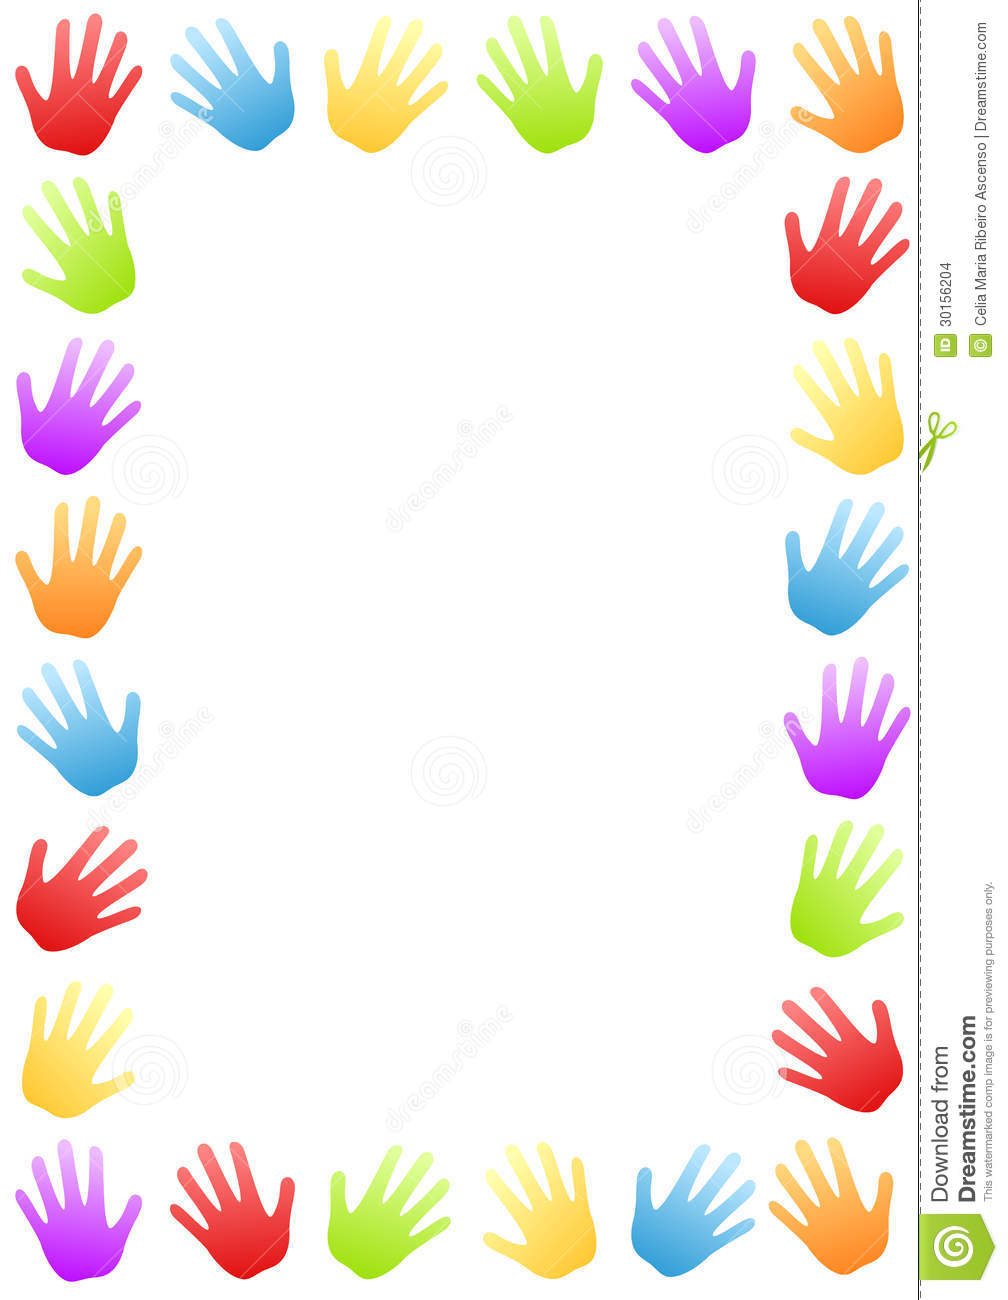 Colored Hands Border Frame Stock Images   Image  30156204